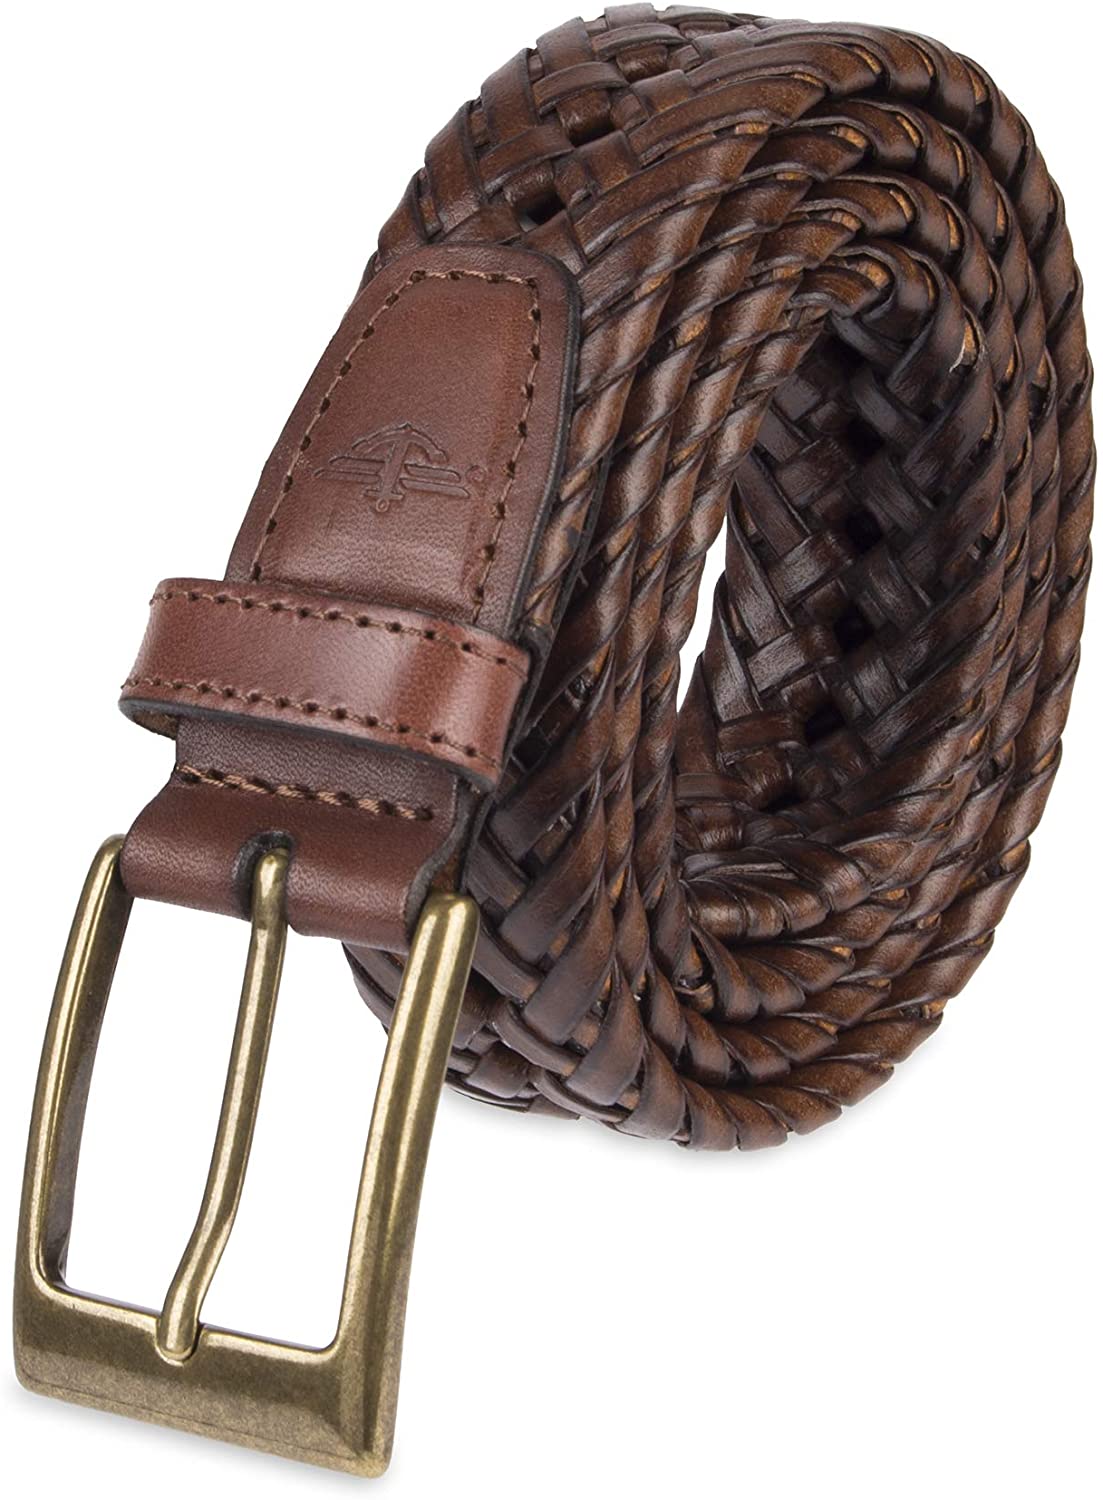 Dockers Men's Leather Braided Casual and Dress Belt | eBay